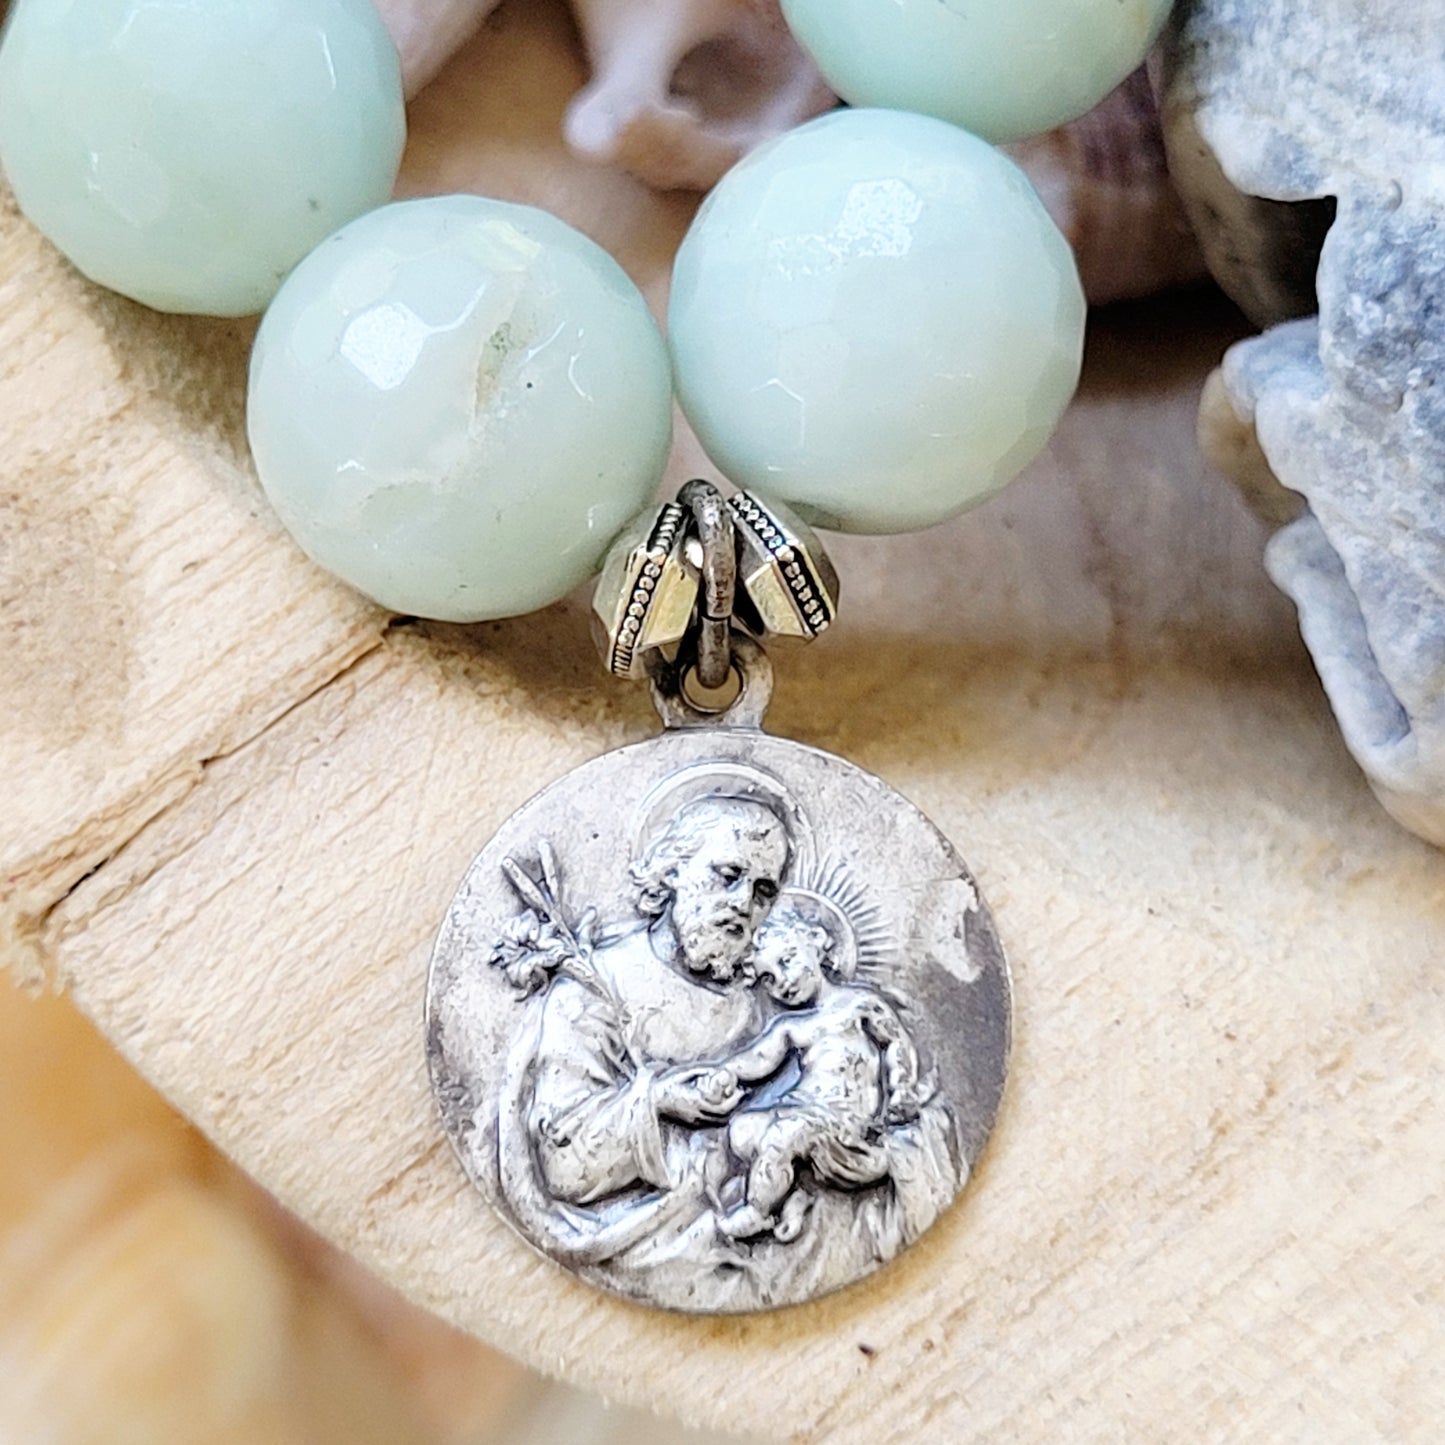 Amazonite Faceted 12mm Beaded Bracelet w/ St Joseph holding Jesus Medal from France - Afterlife Jewelry Designs